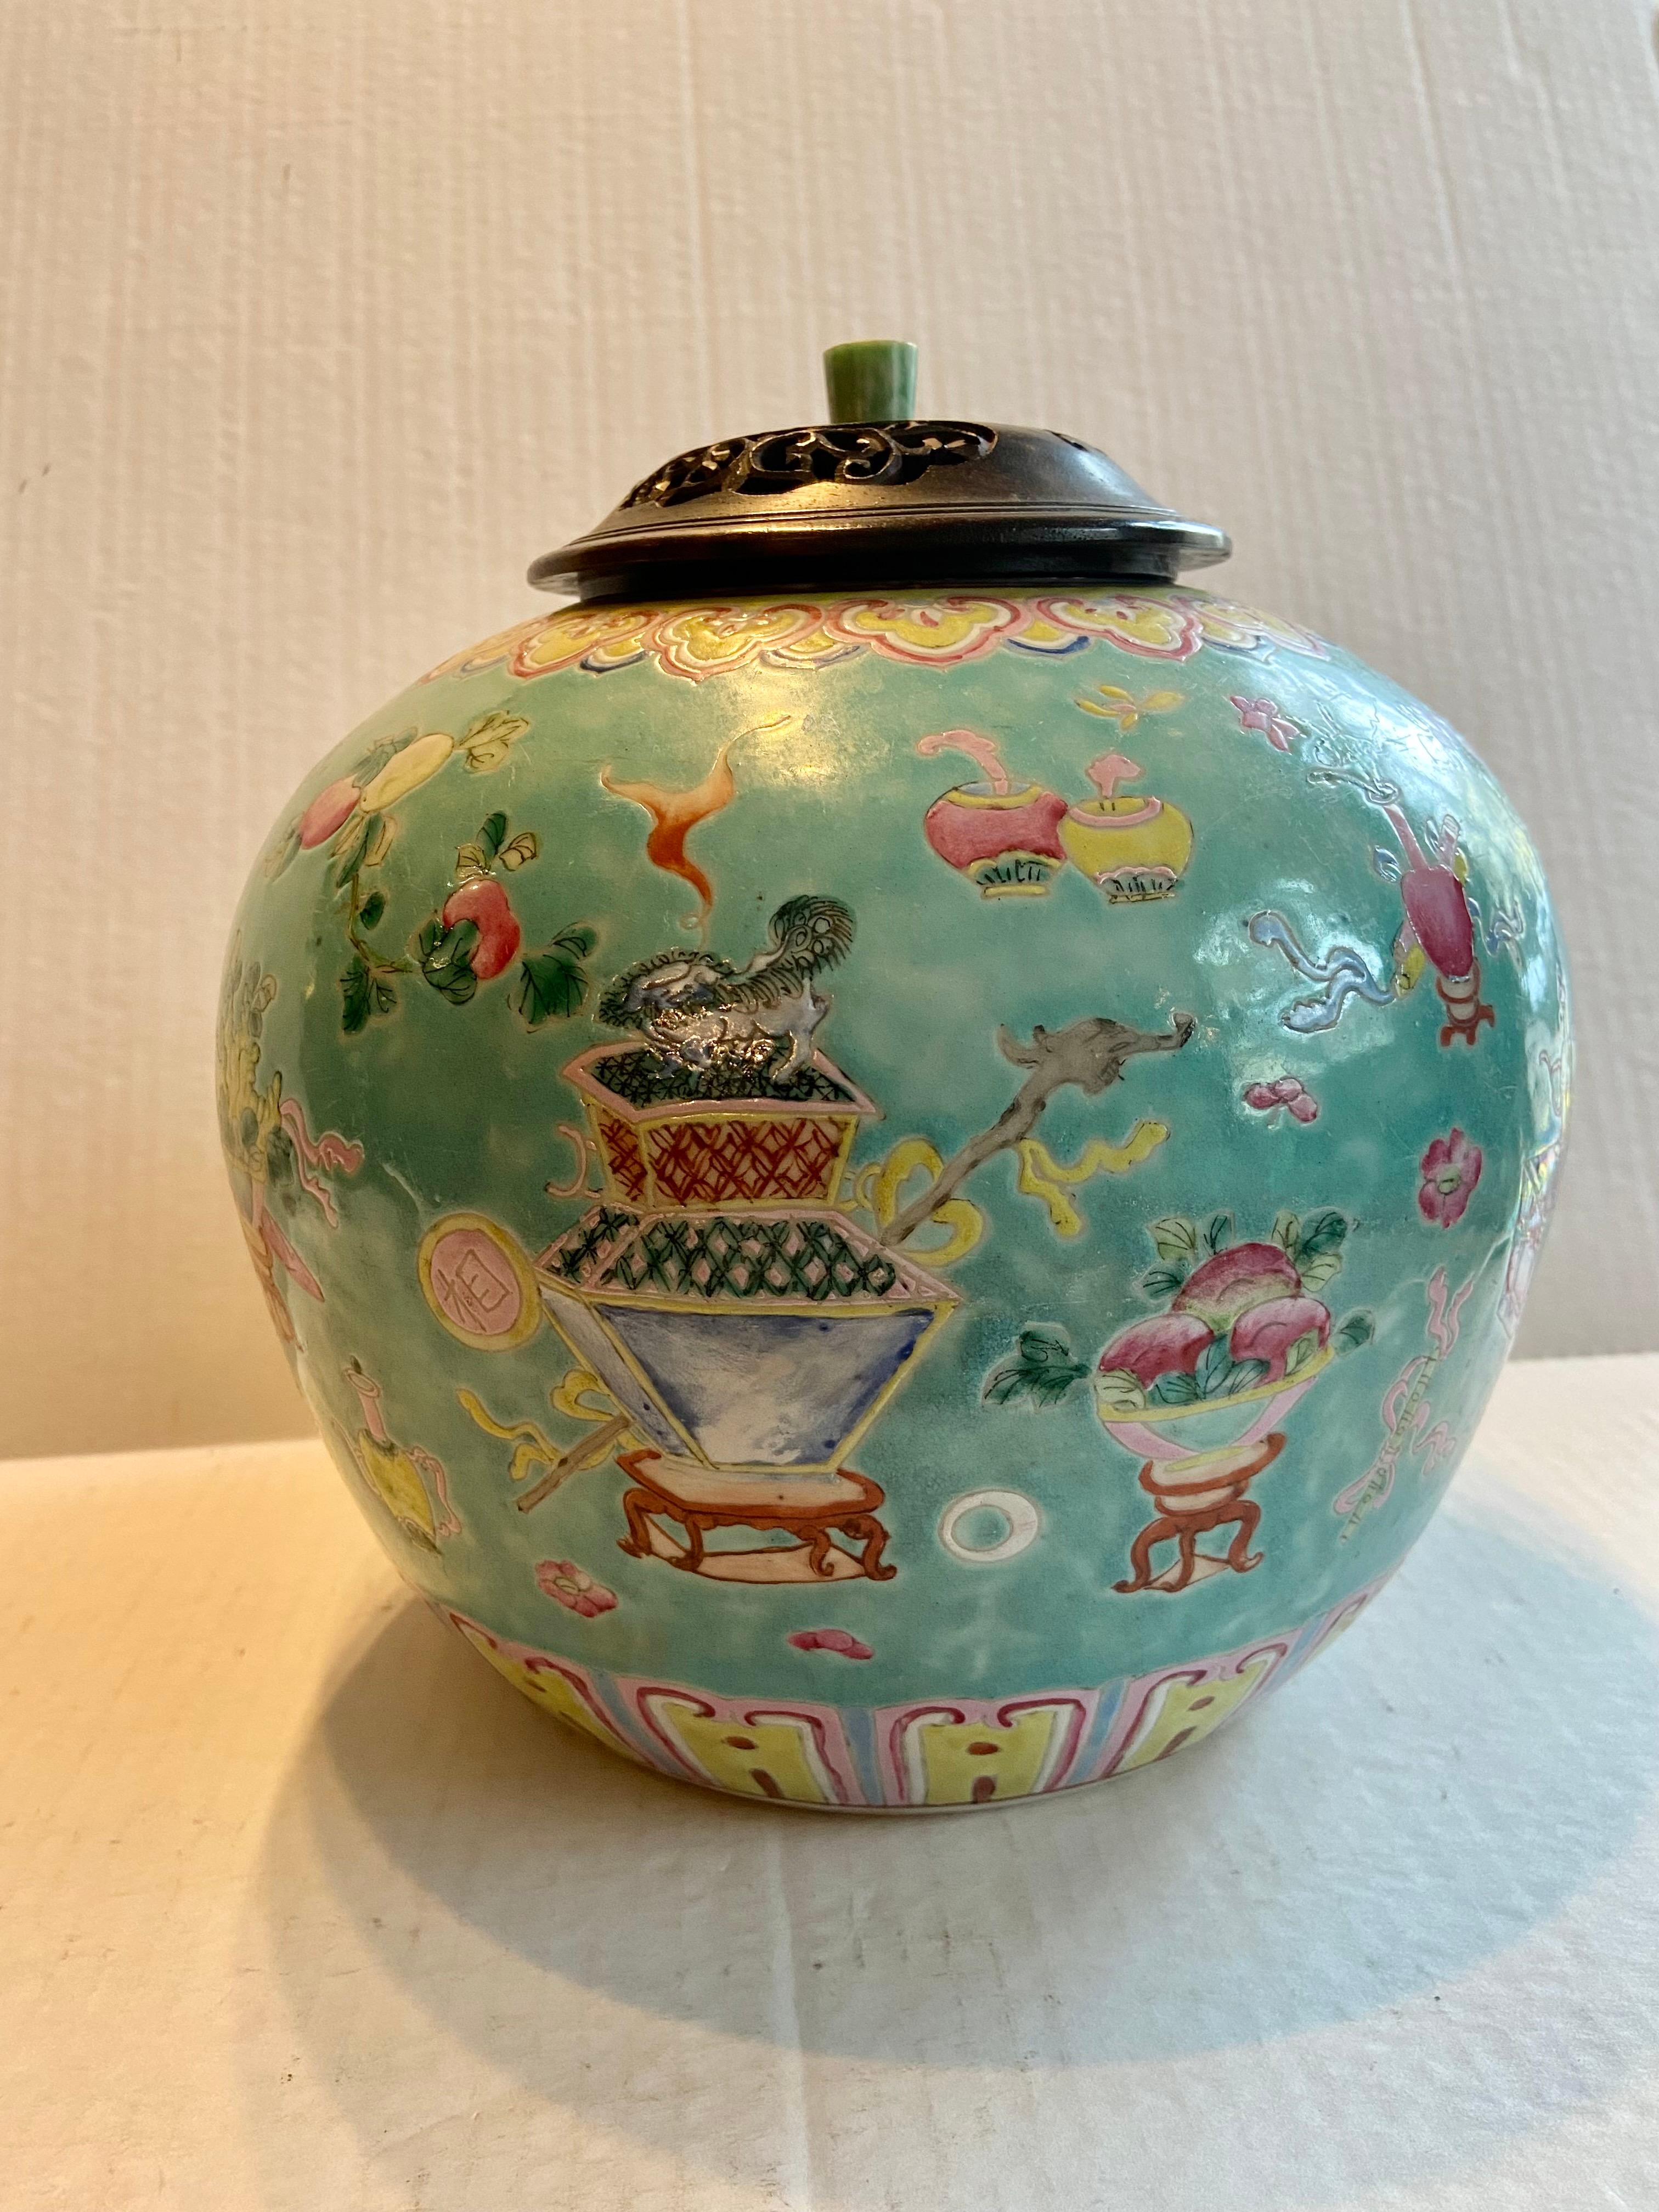 Chinese hand painted Late Qing Dynasty (late 19th century) Turquoise Ground Famille Rose porcelain lidded ginger jar. The jar is finely decorated in rich polychrome enamels with soft colored symbols of a joyful life, these were typical motifs on